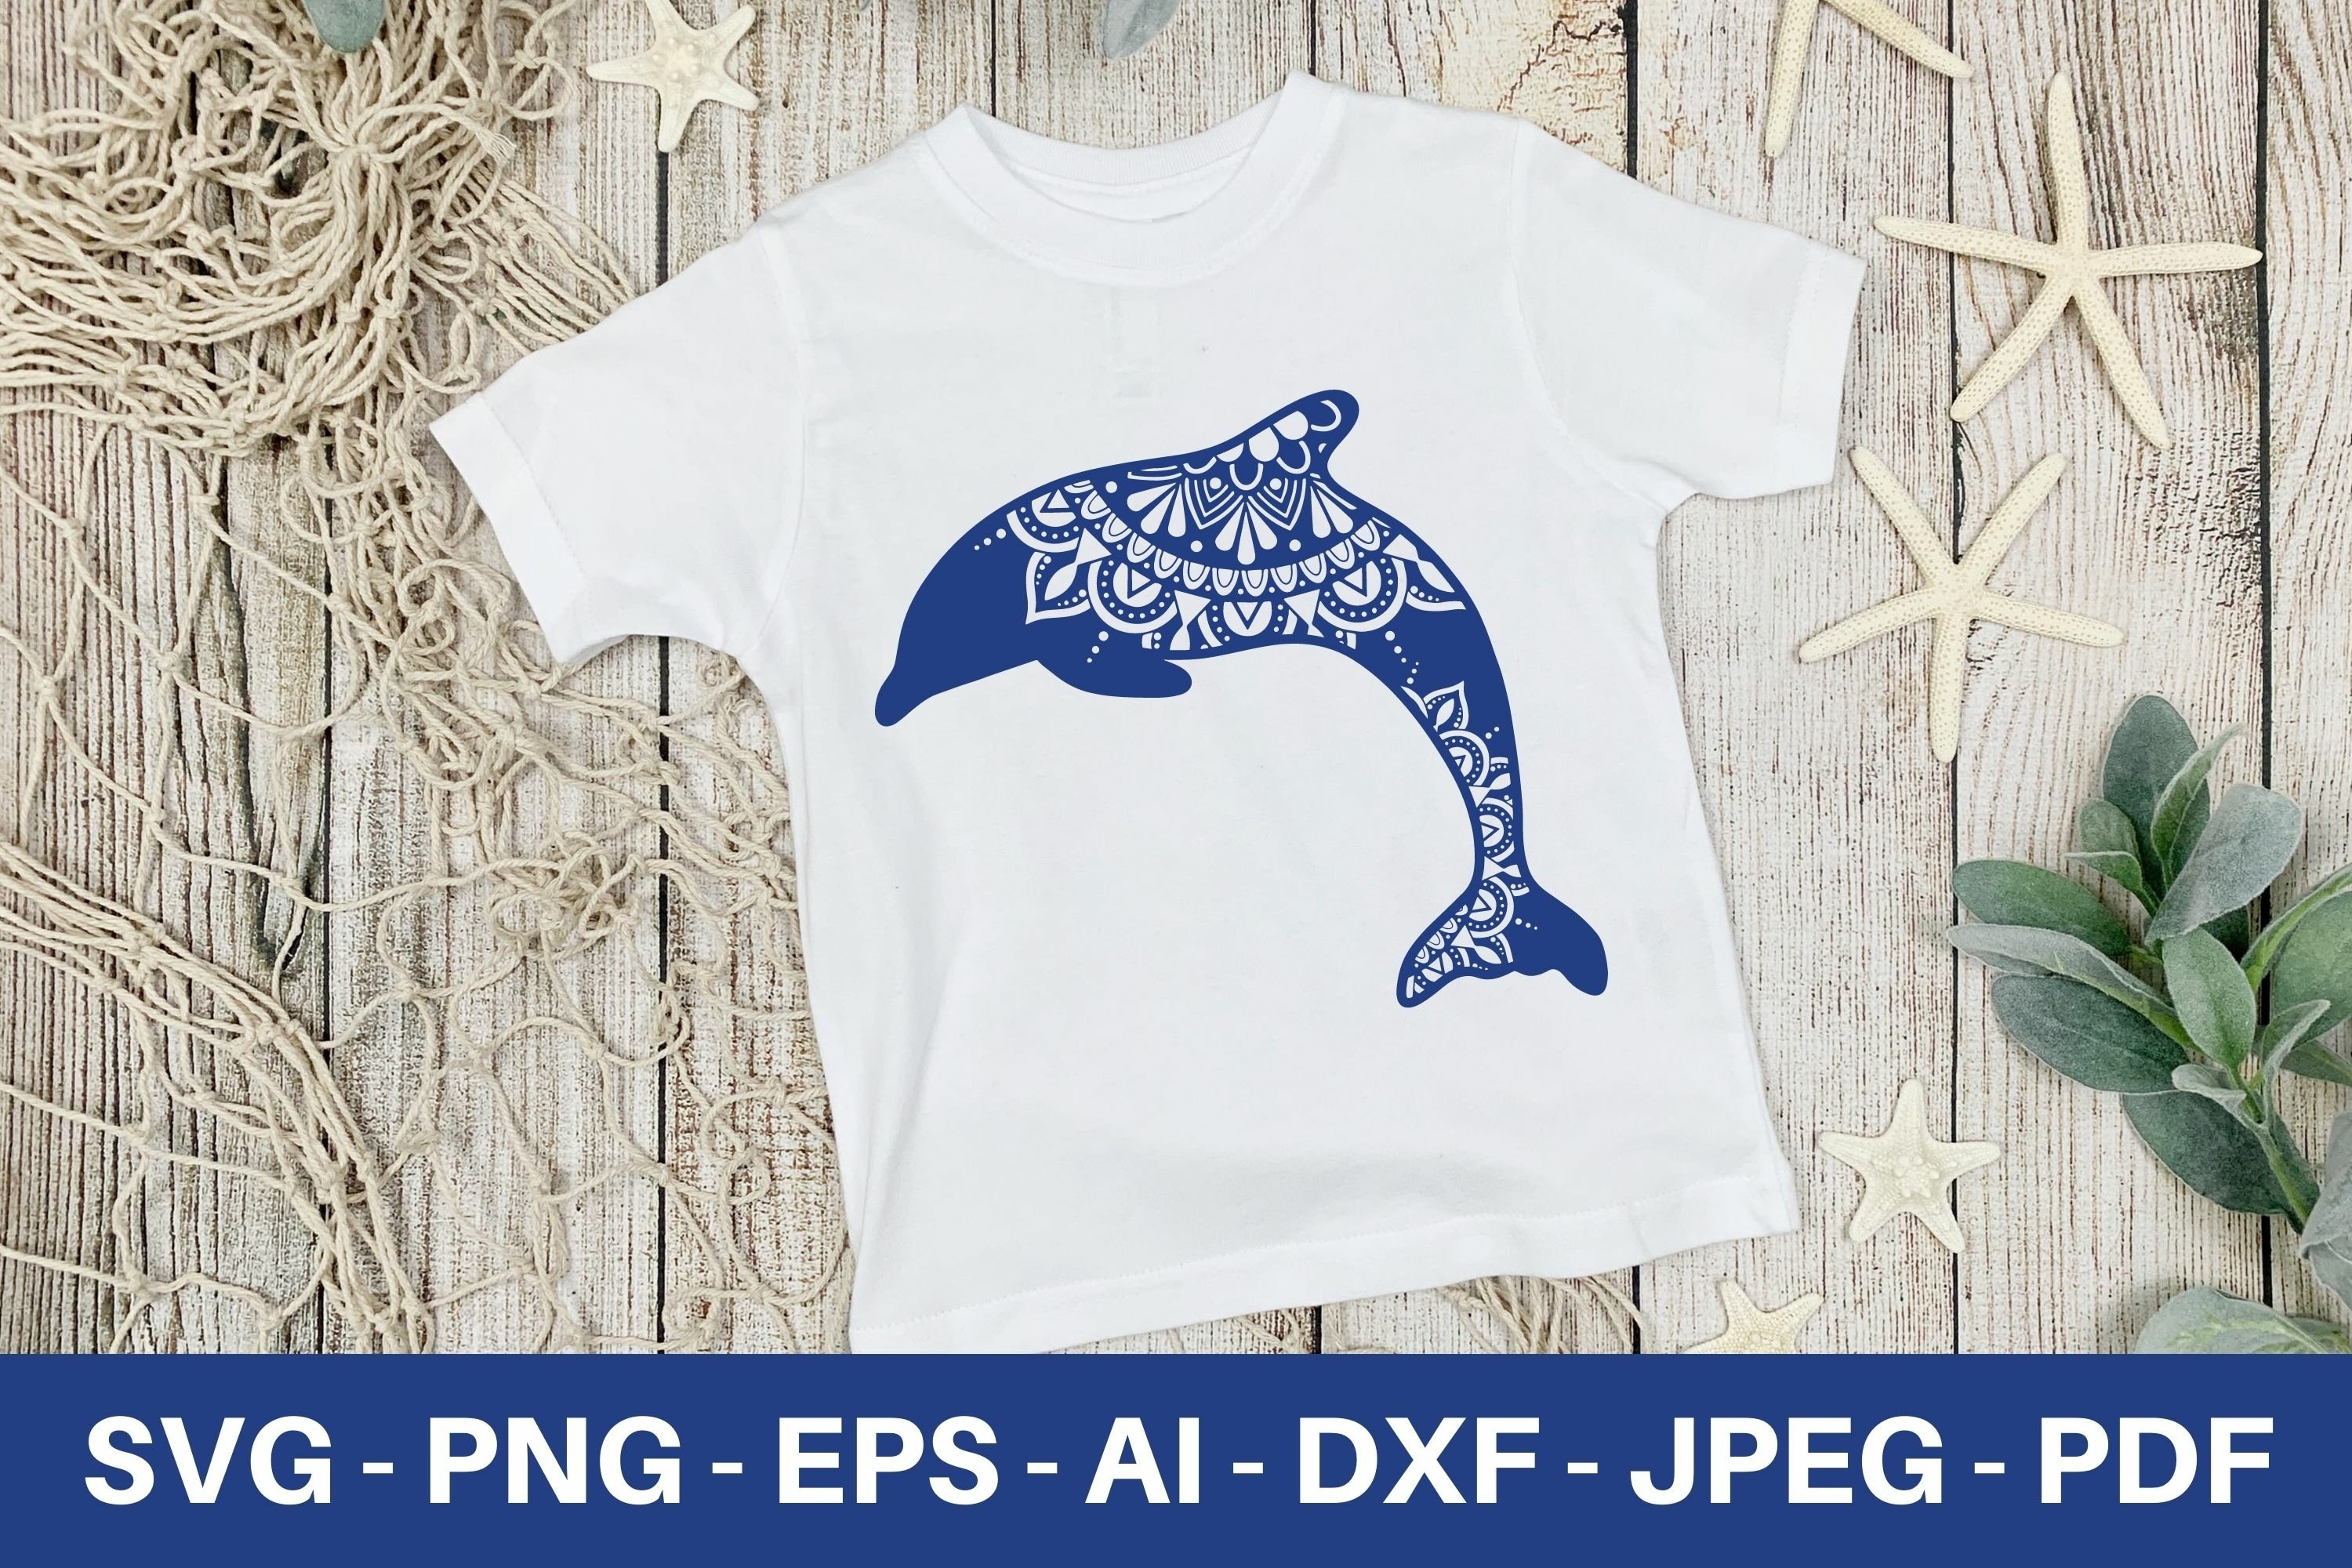 White shirt with a blue dolphin on it.